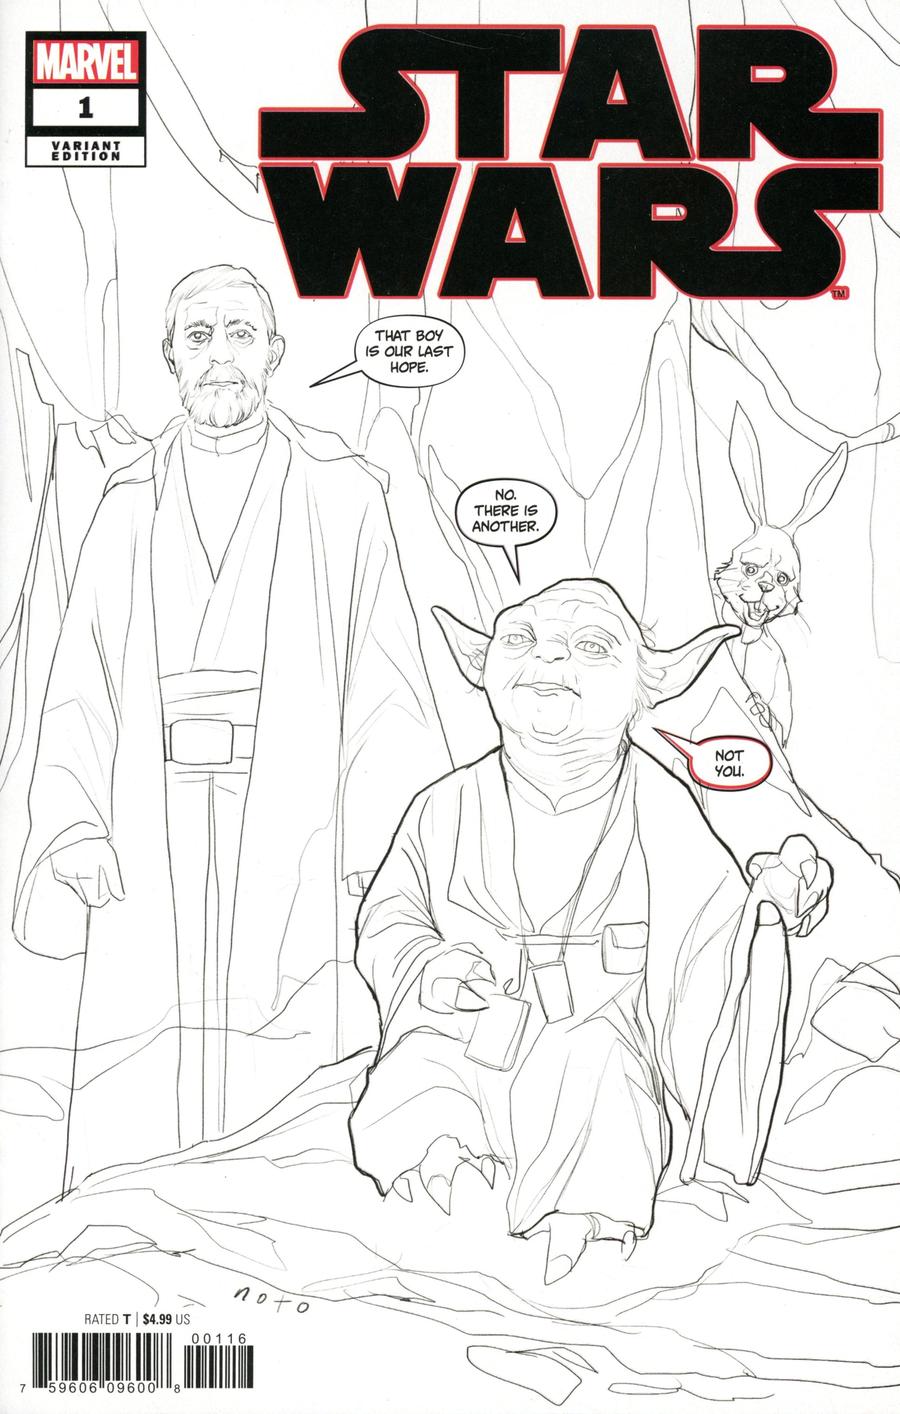 Star Wars #1 (Phil Noto Party Sketch Variant Cover) (01.01.2020)